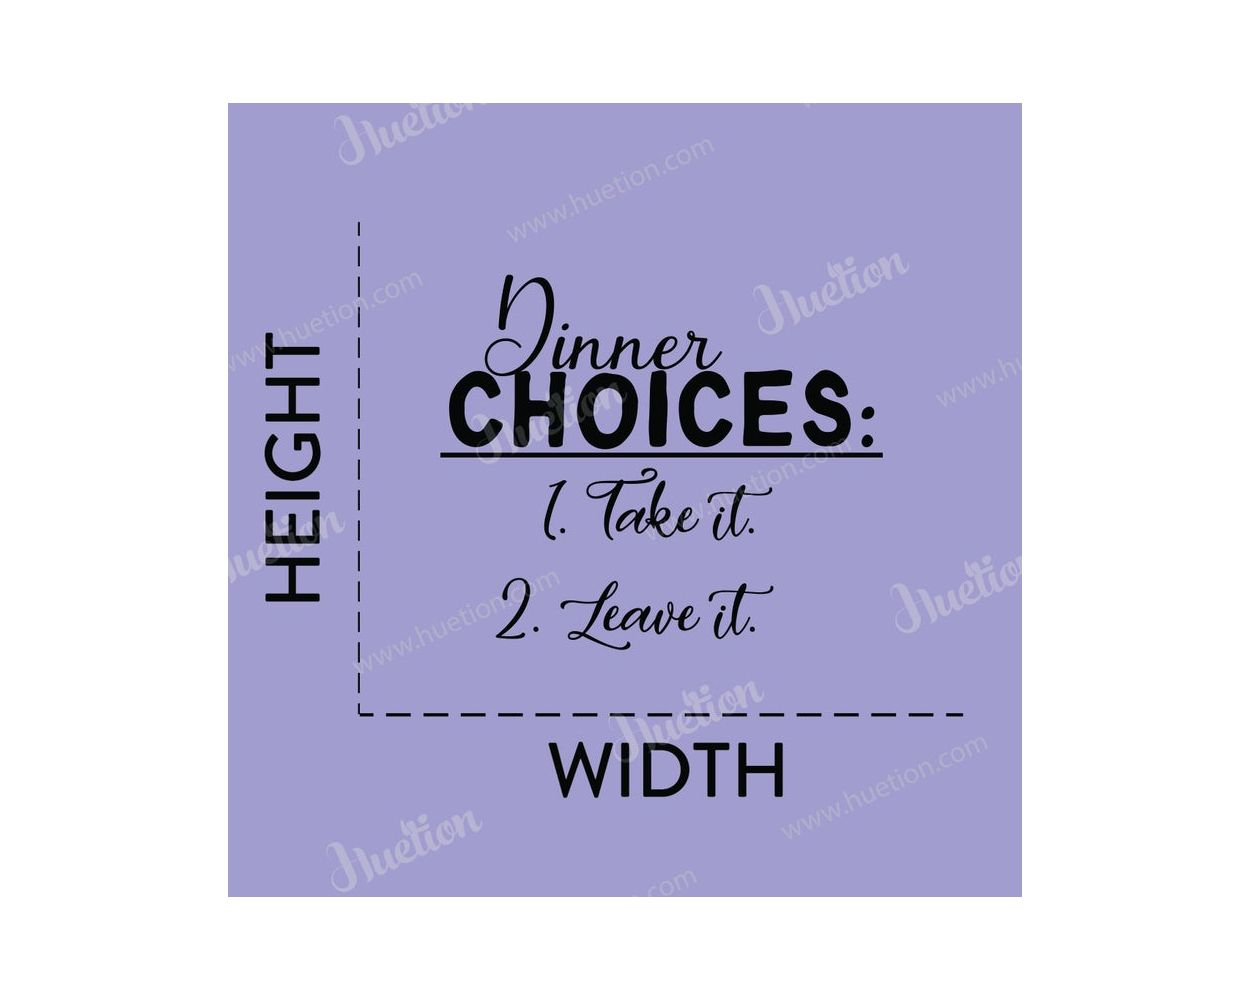 Dinner Choices Quotes Wall Decals for Kitchen Wall Decor . shop now